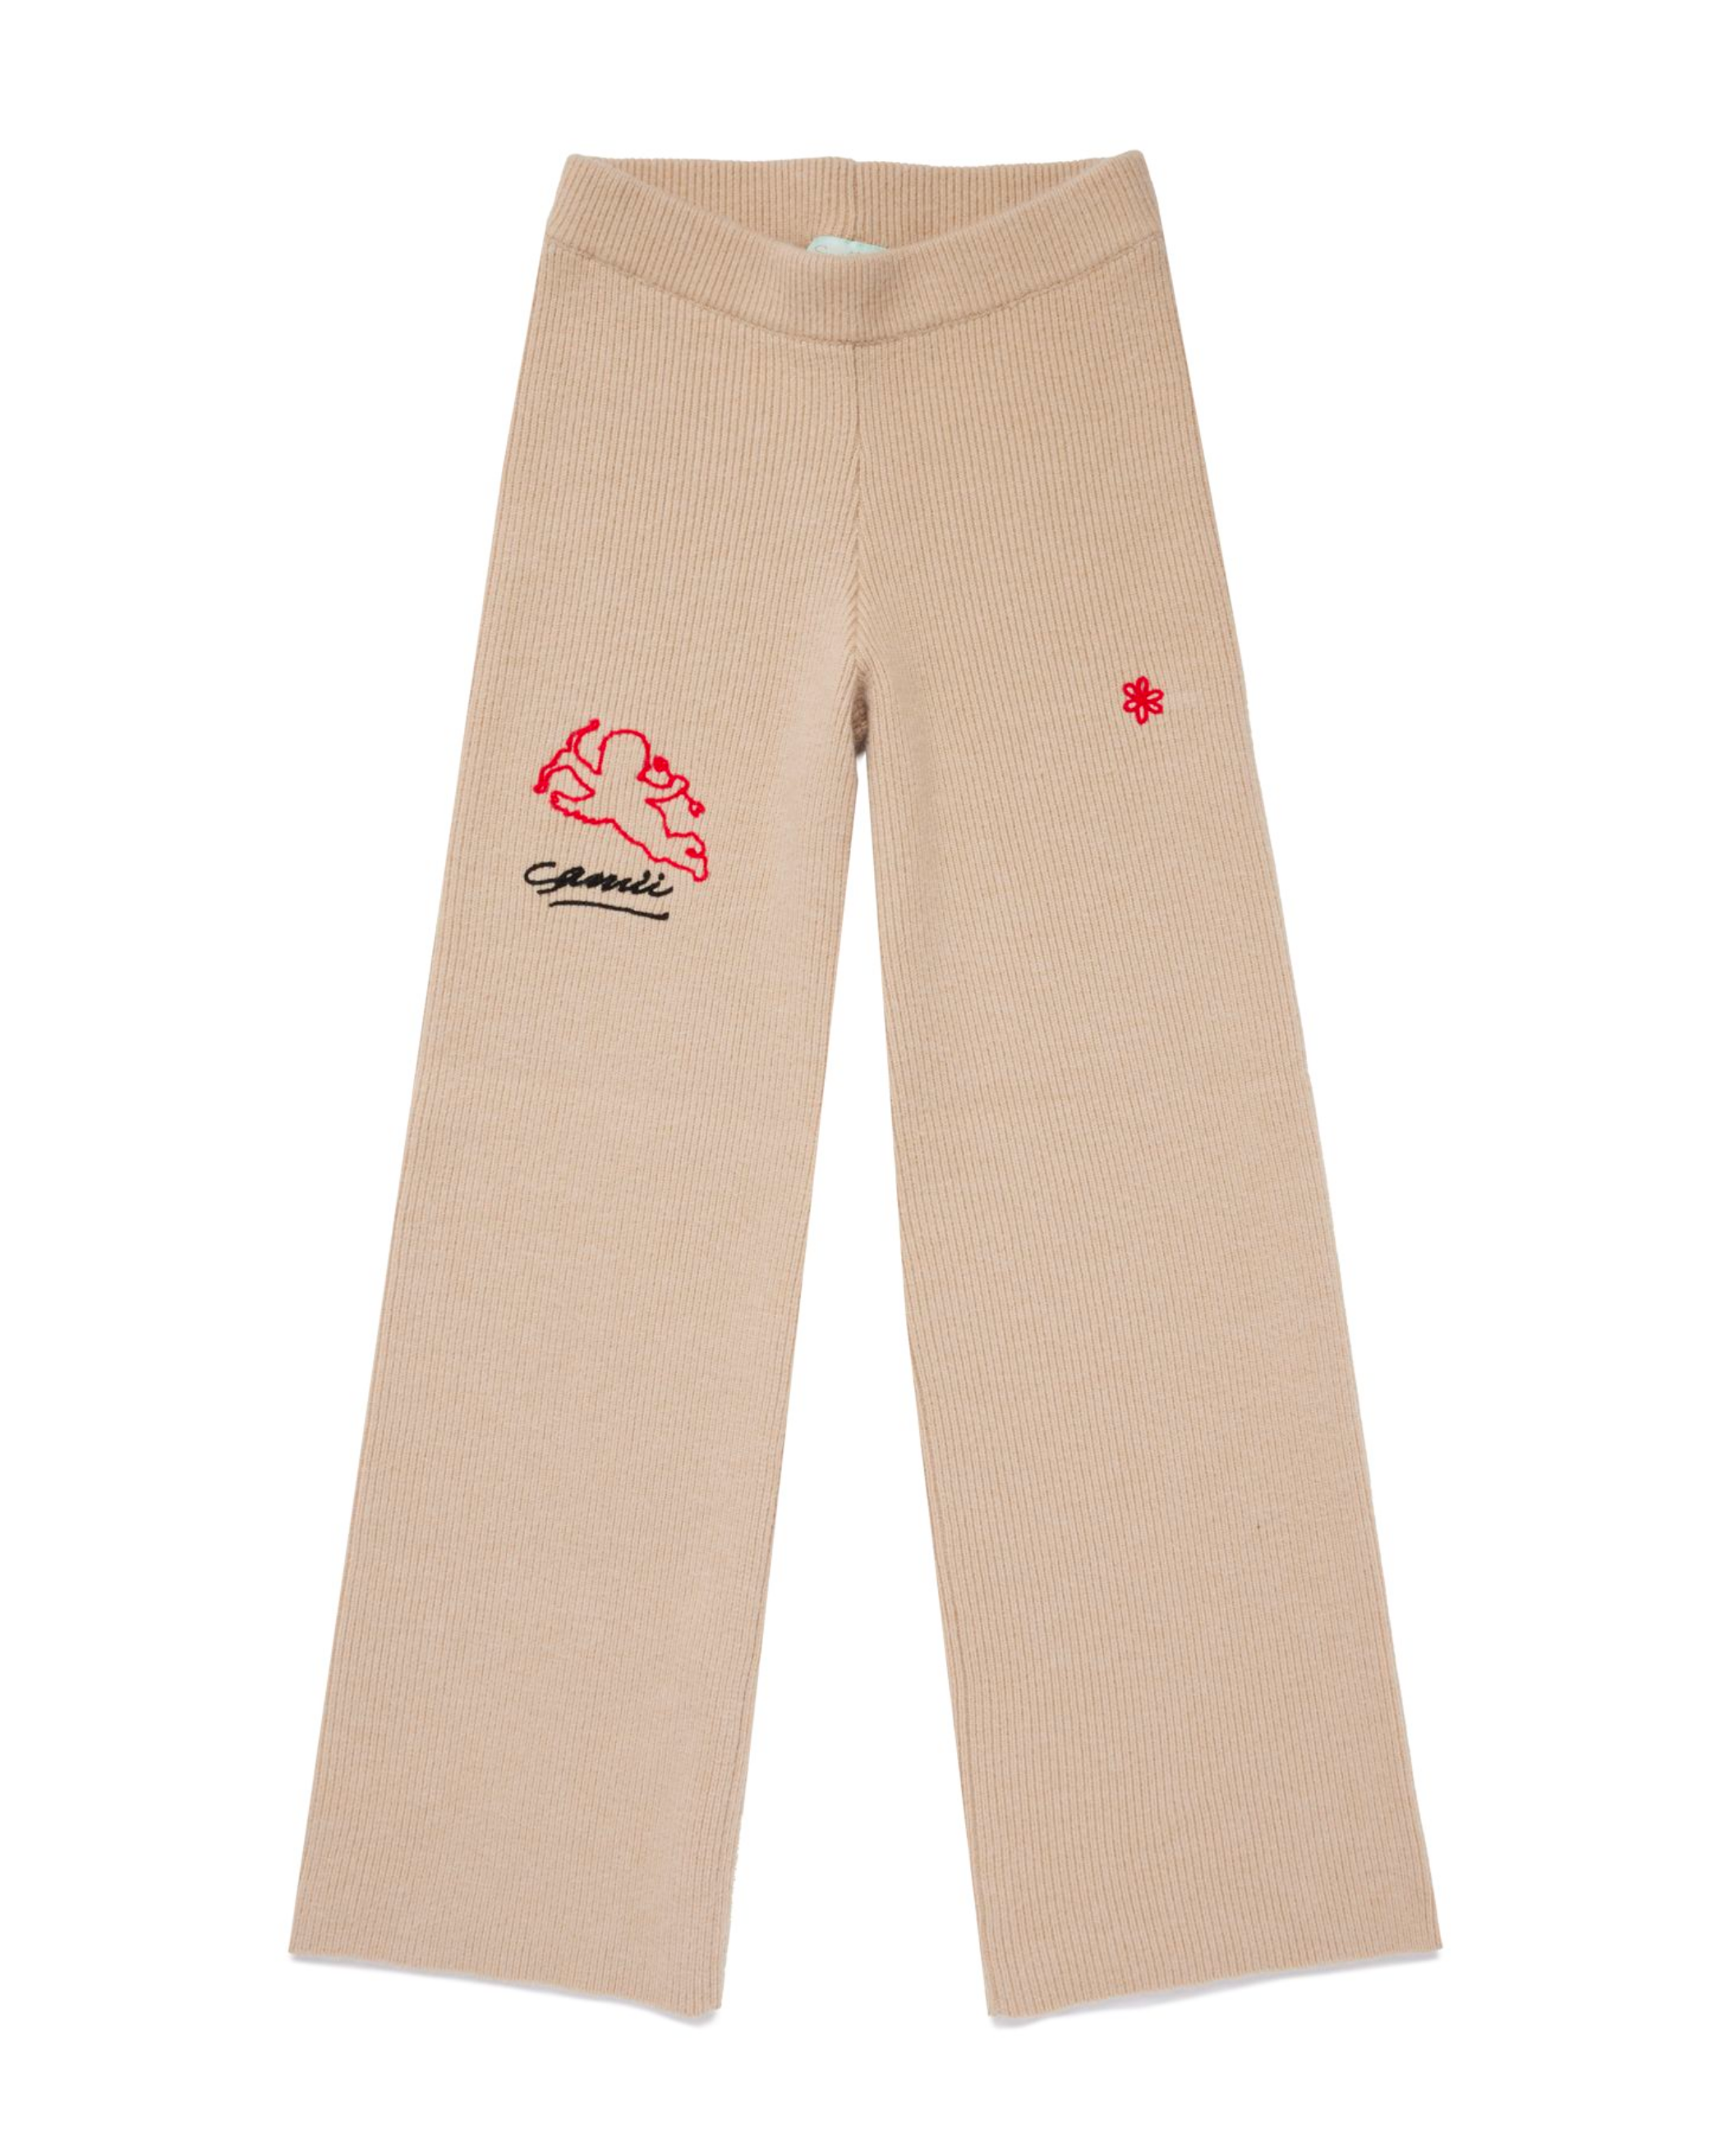 Alternate View 1 of Cupid Knit Pants